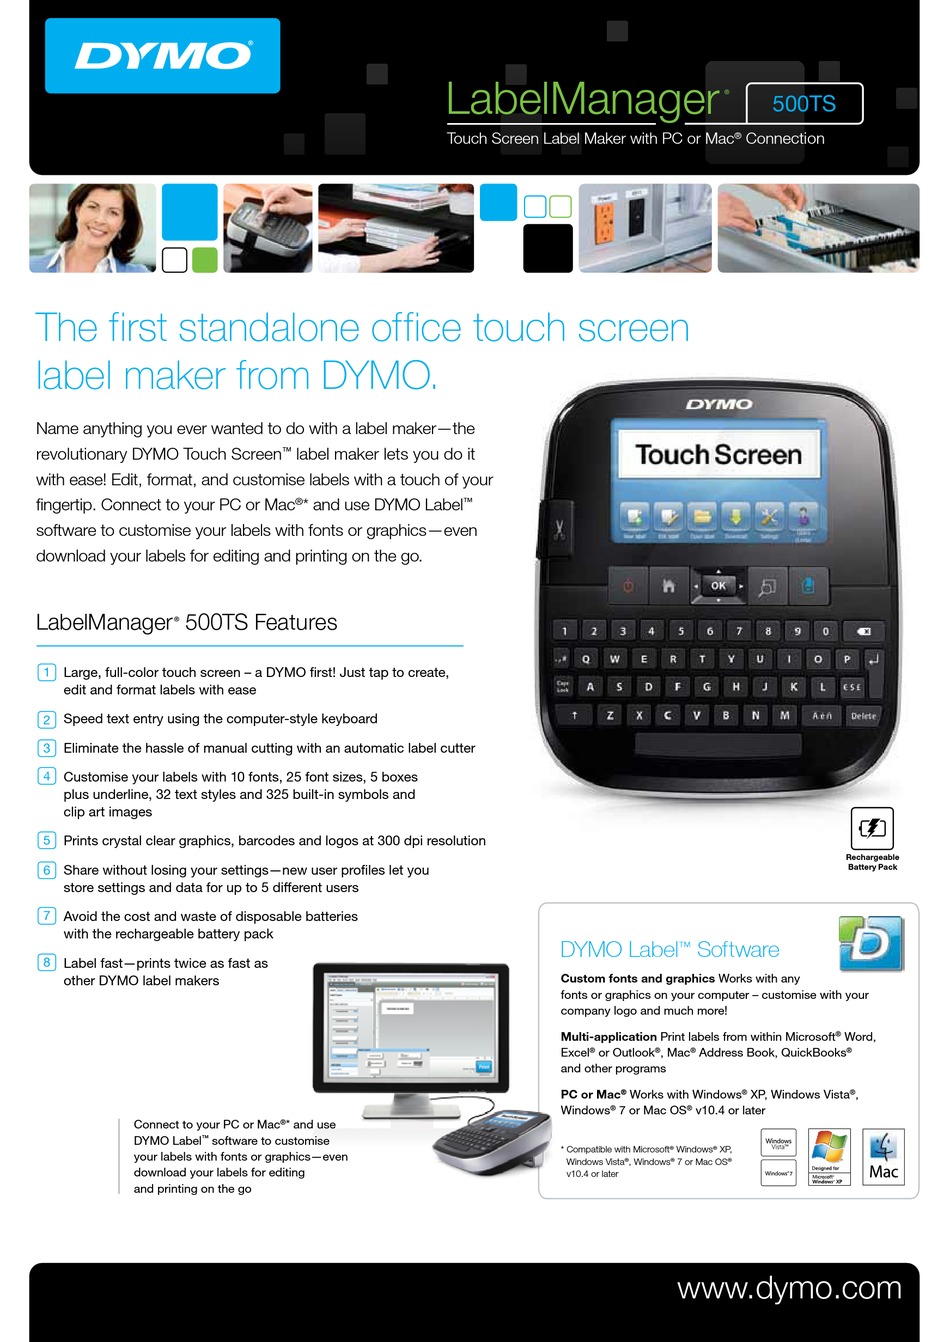 dymo labelmanager 500ts software download